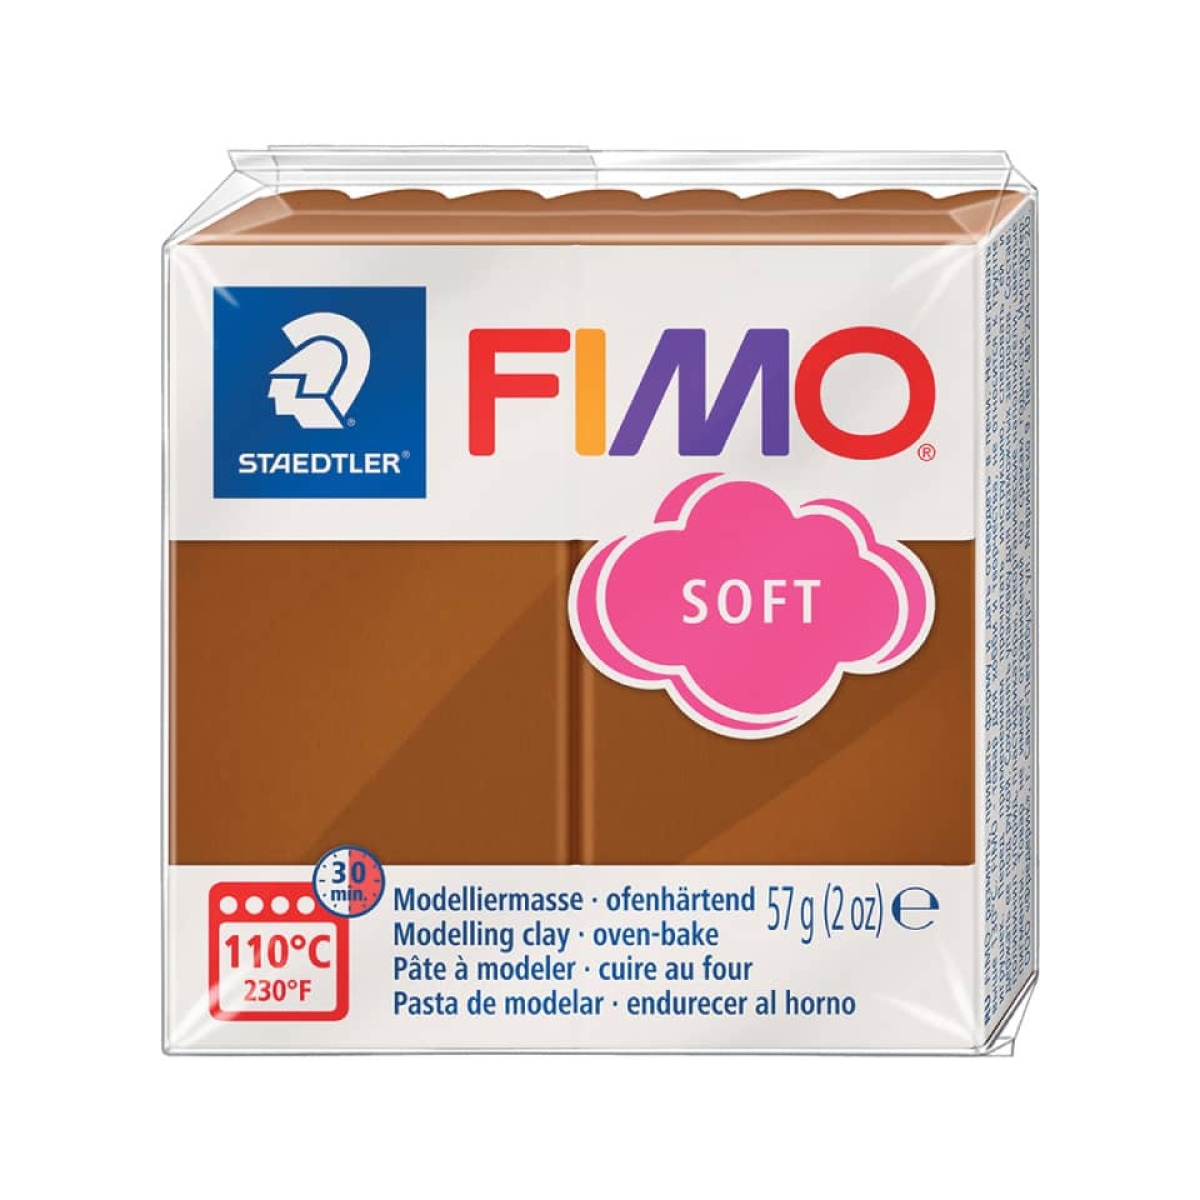 STAEDTLERModeling clay FIMO® soft, 57 g, caramel 8020-7-Price for 0.0570 kgArticle-No: 4006608809799